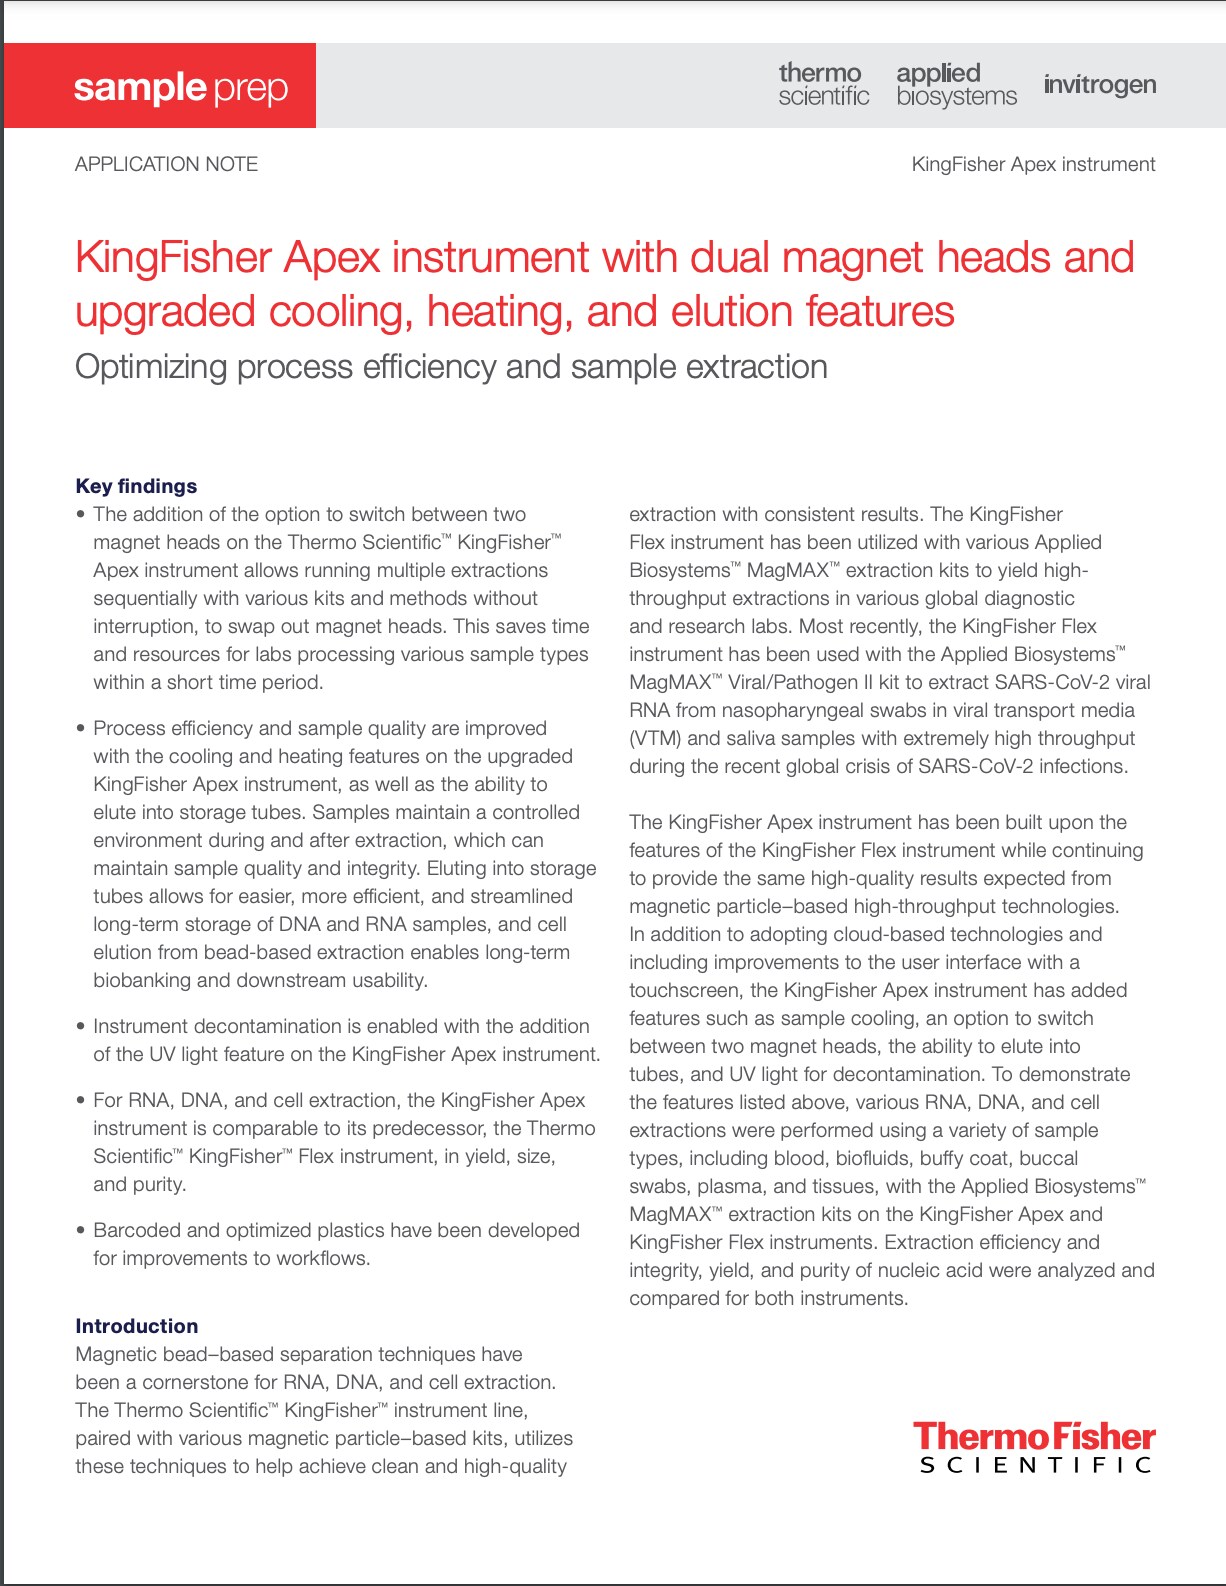 KingFisher Apex instrument with dual magnet heads and upgraded cooling, heating, and elution features